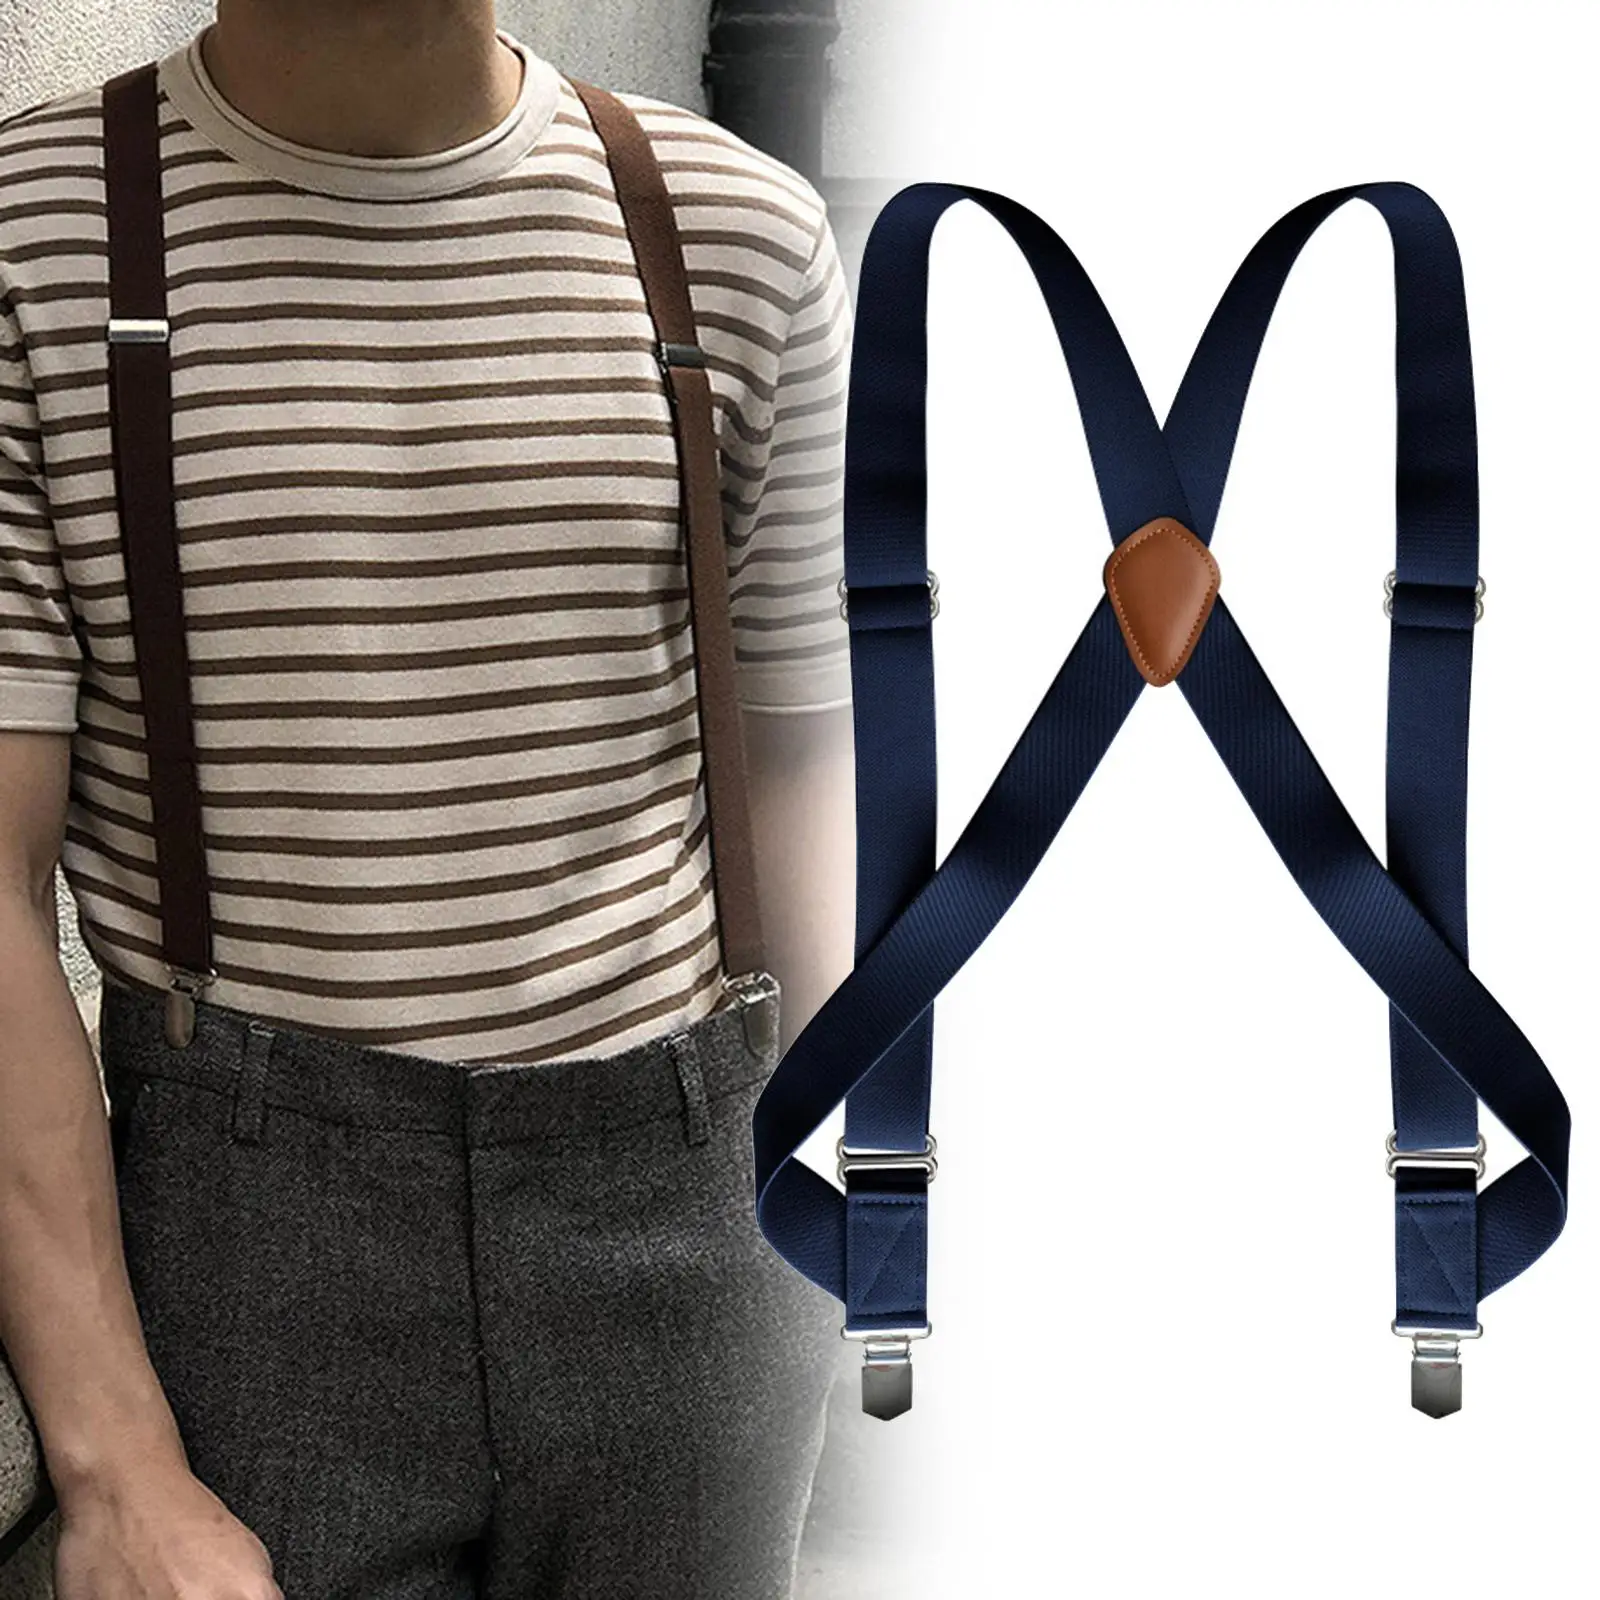 Mens Suspender with Clips Washable Adjustable Fits Jeans Big Tall Friends